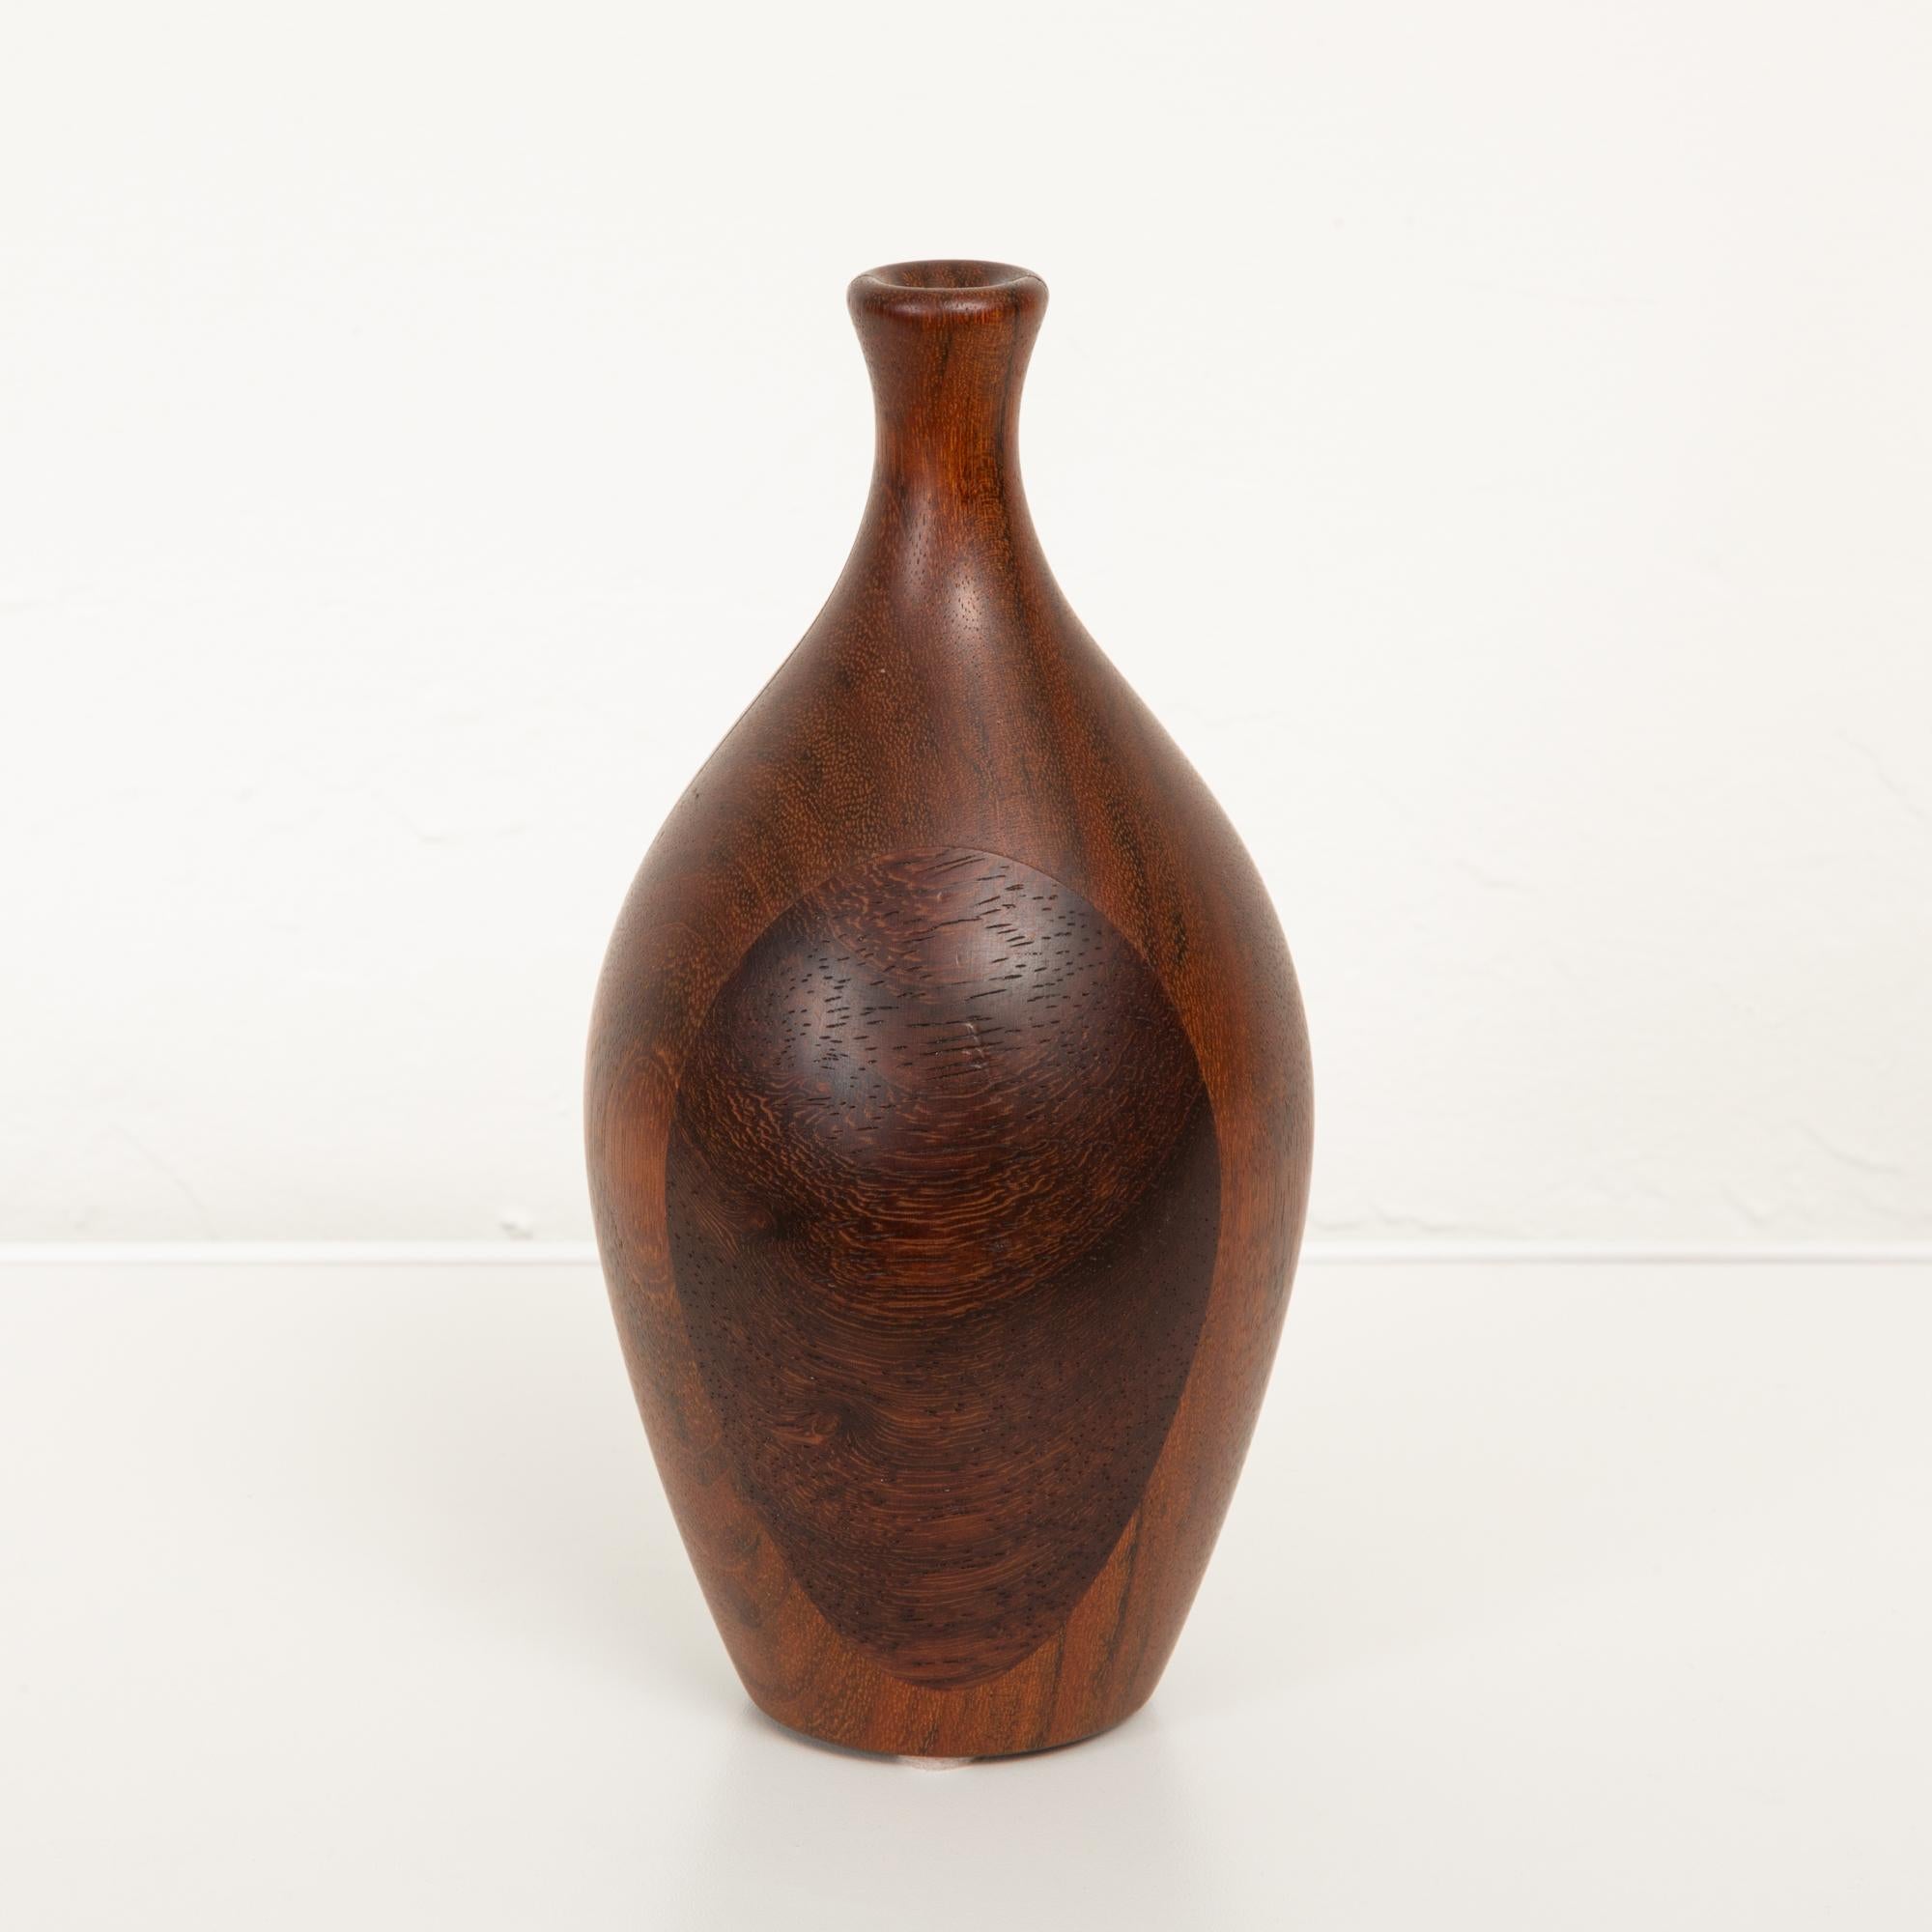 A hand turned wooden vessel featuring a stack laminated body and detailed precision in the execution of the construction. The wood has a beautiful patina that is appropriate for the age of the piece with subtle grain pattern and some darker